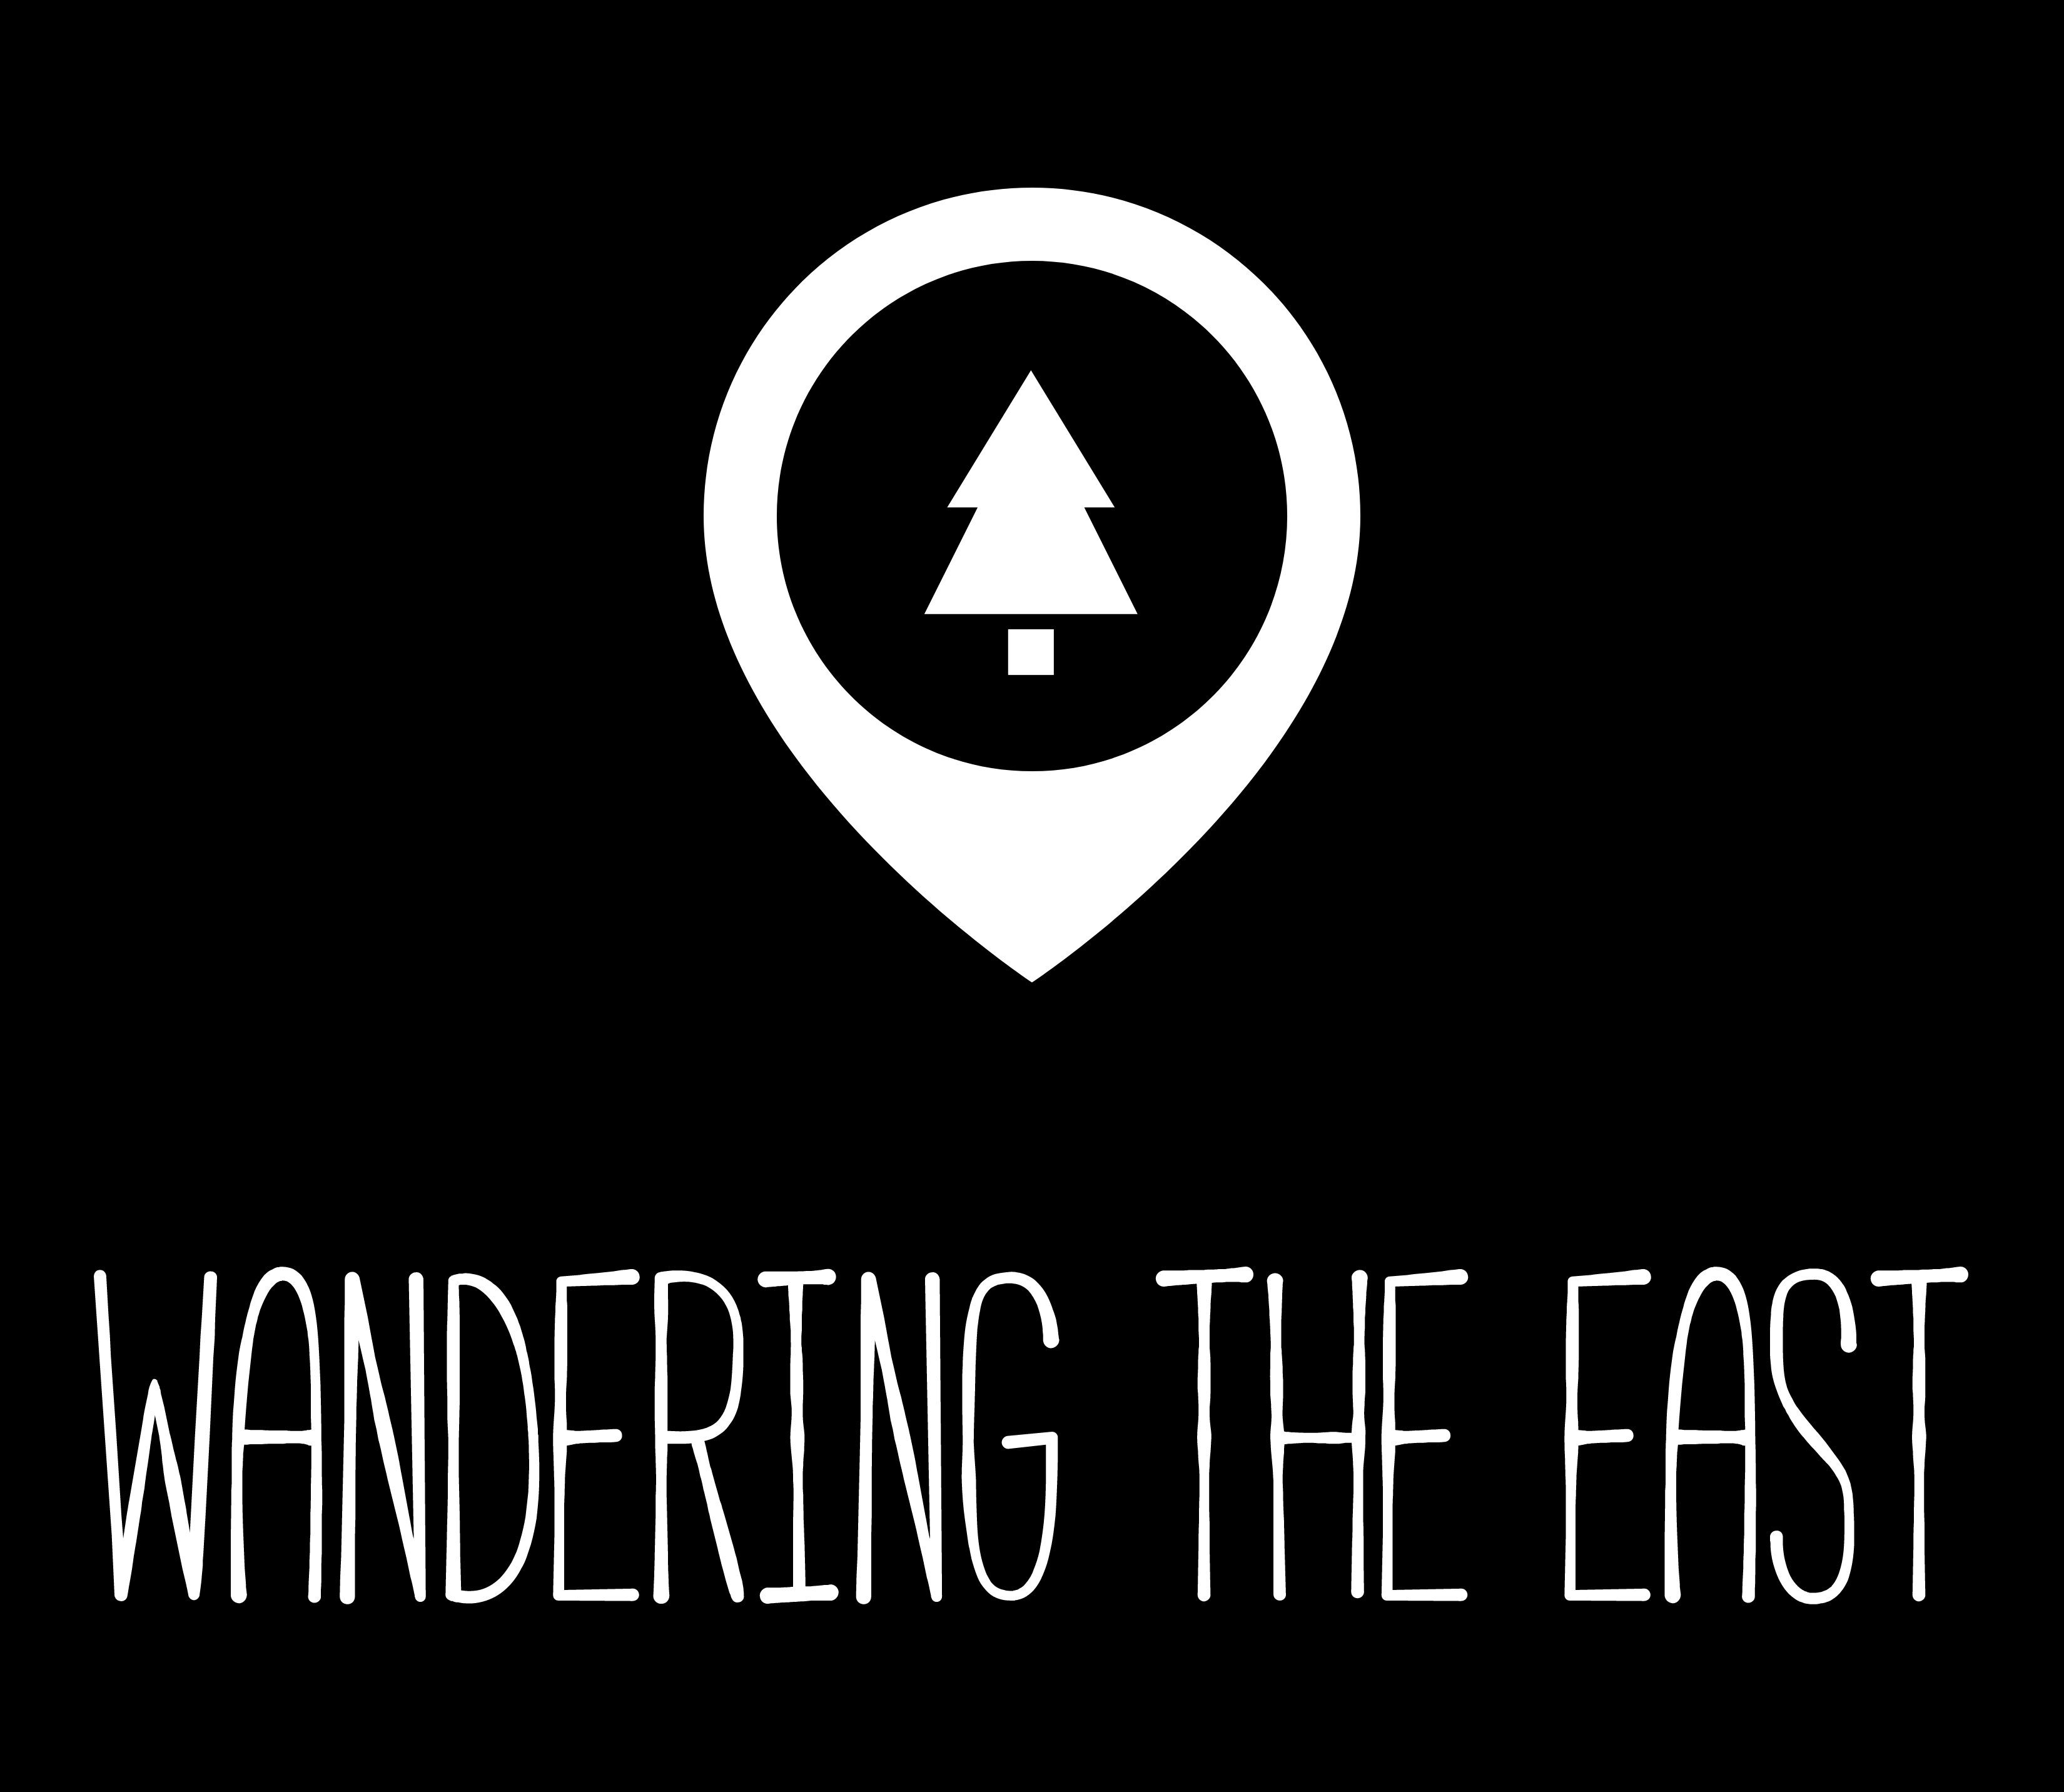 Wandering The East